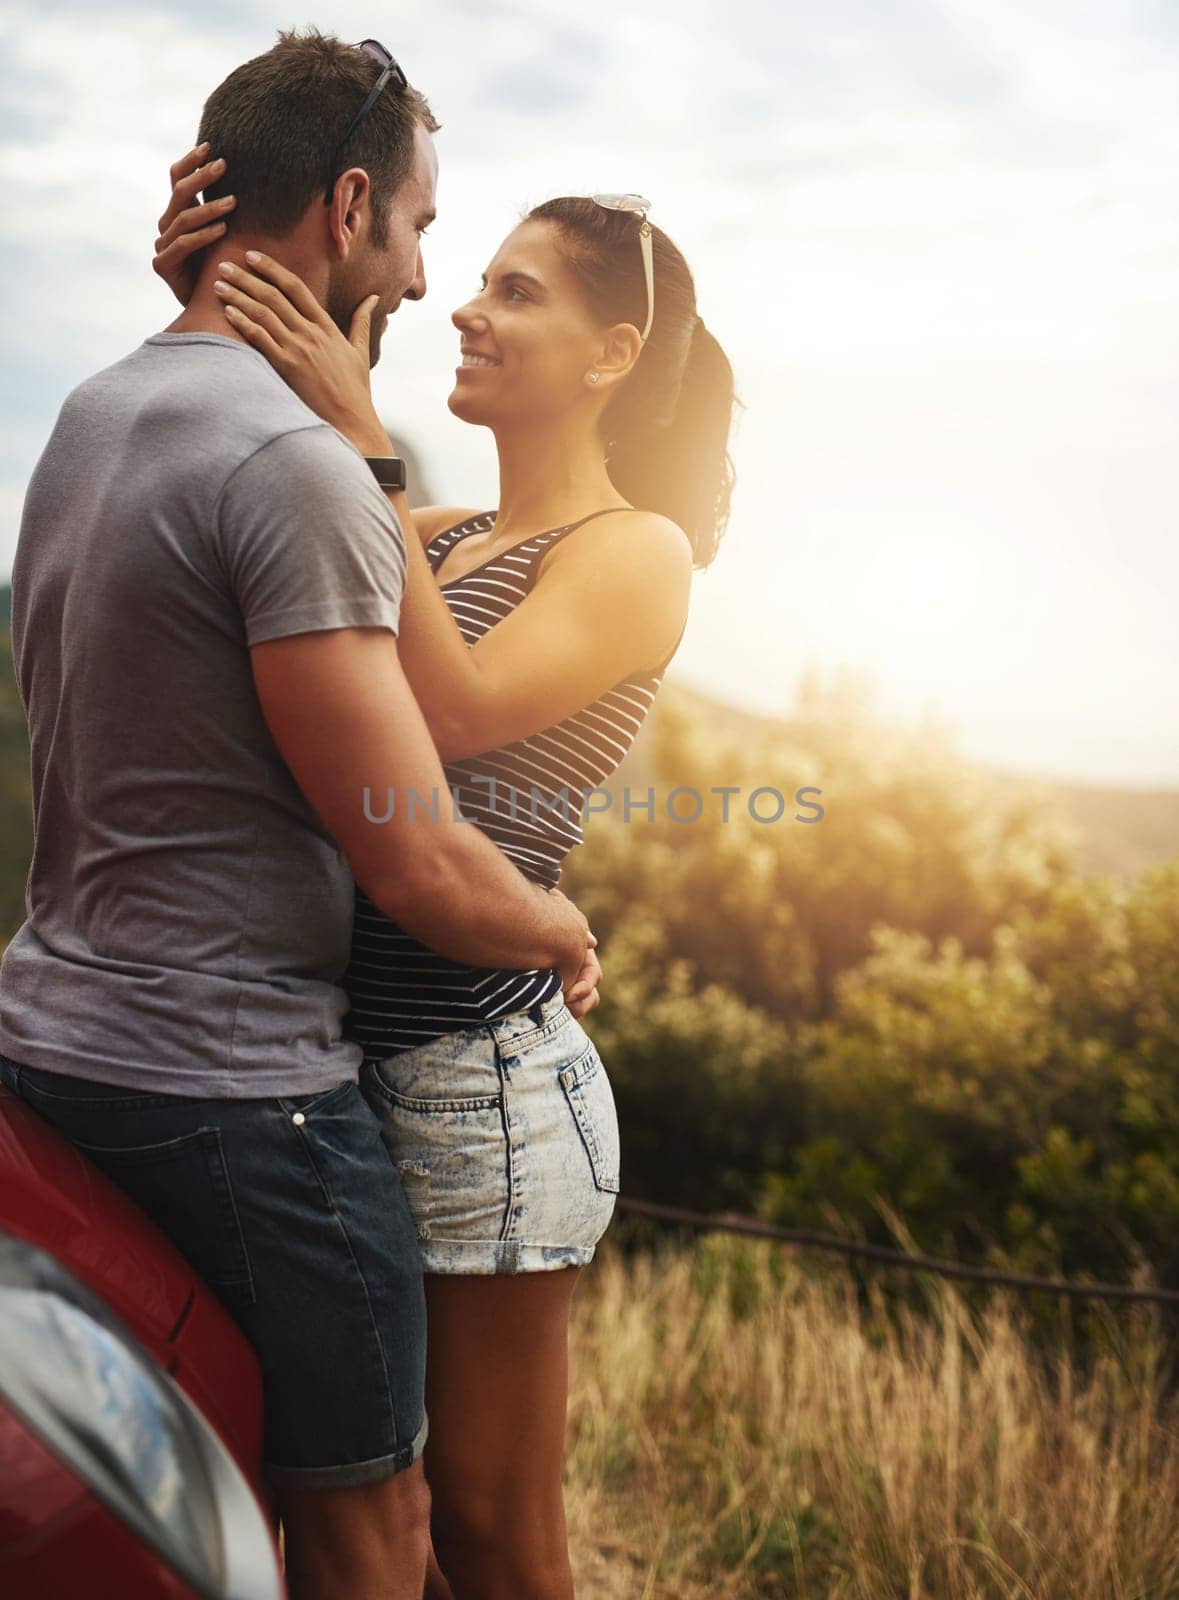 Road trip, love or happy couple hug in nature for date, support or care on a summer break or park adventure. Freedom, man or woman on outdoor holiday vacation together to bond, relax or travel in USA.